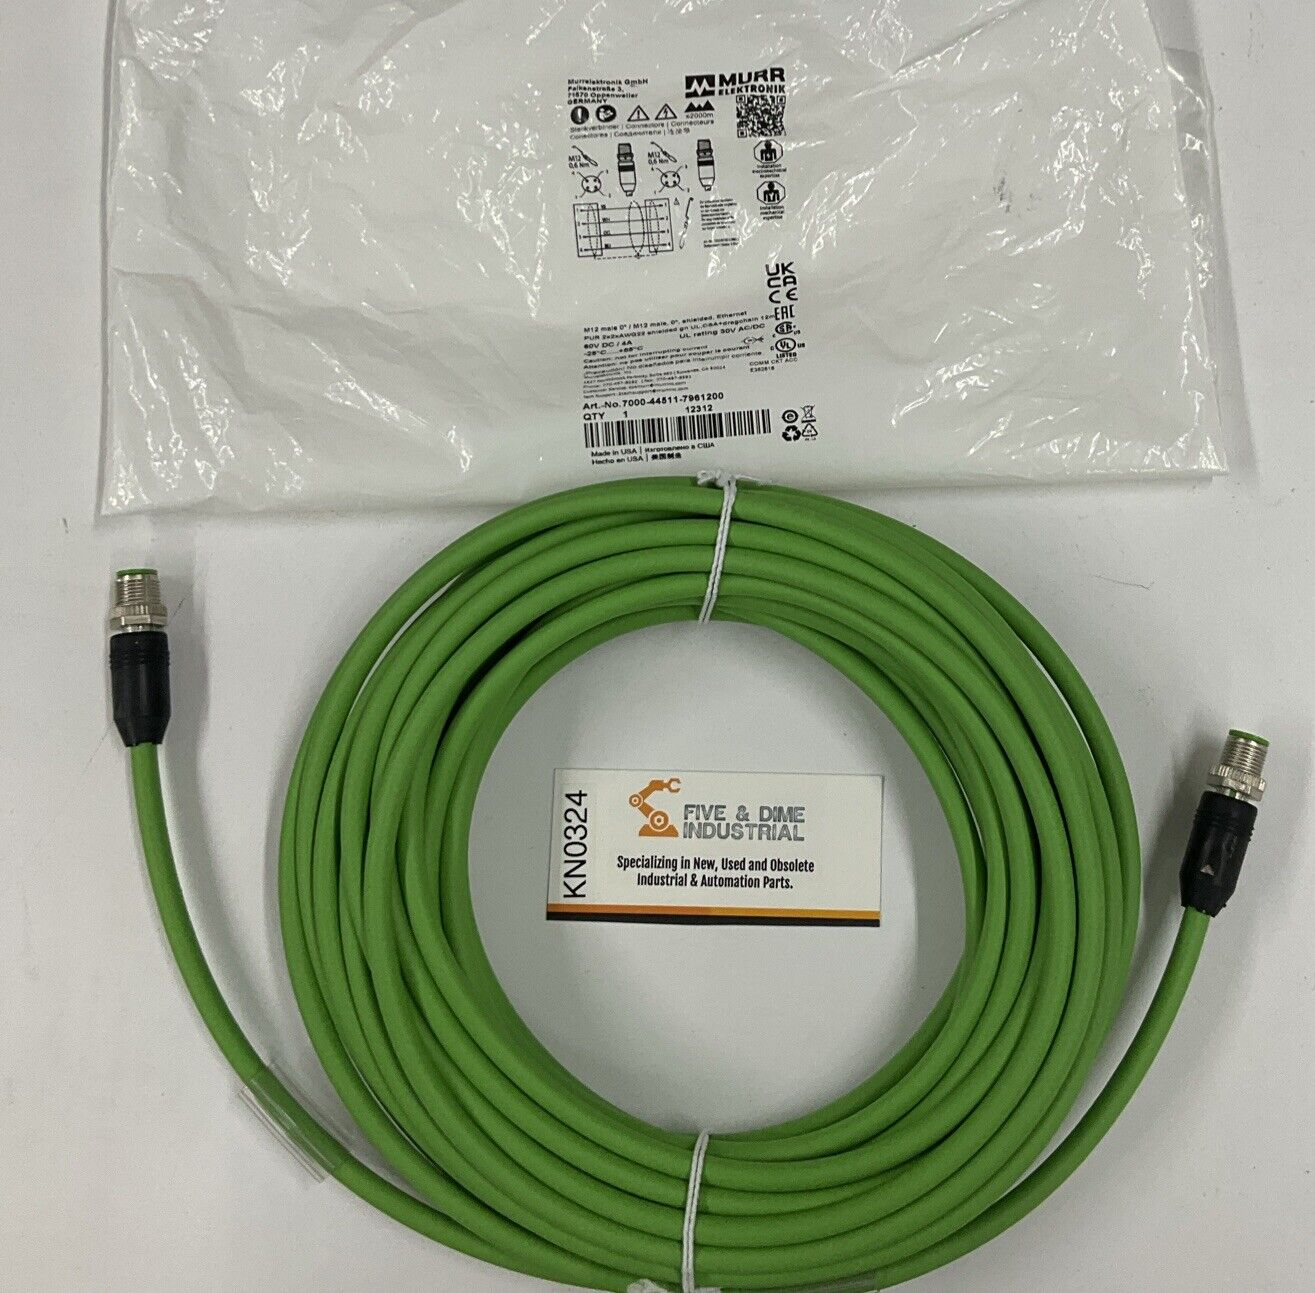 Murr 7000-44511-7961200 M12, Male/Male, 4-Pin, 12 Meters Ethernet Cable (CBL106)